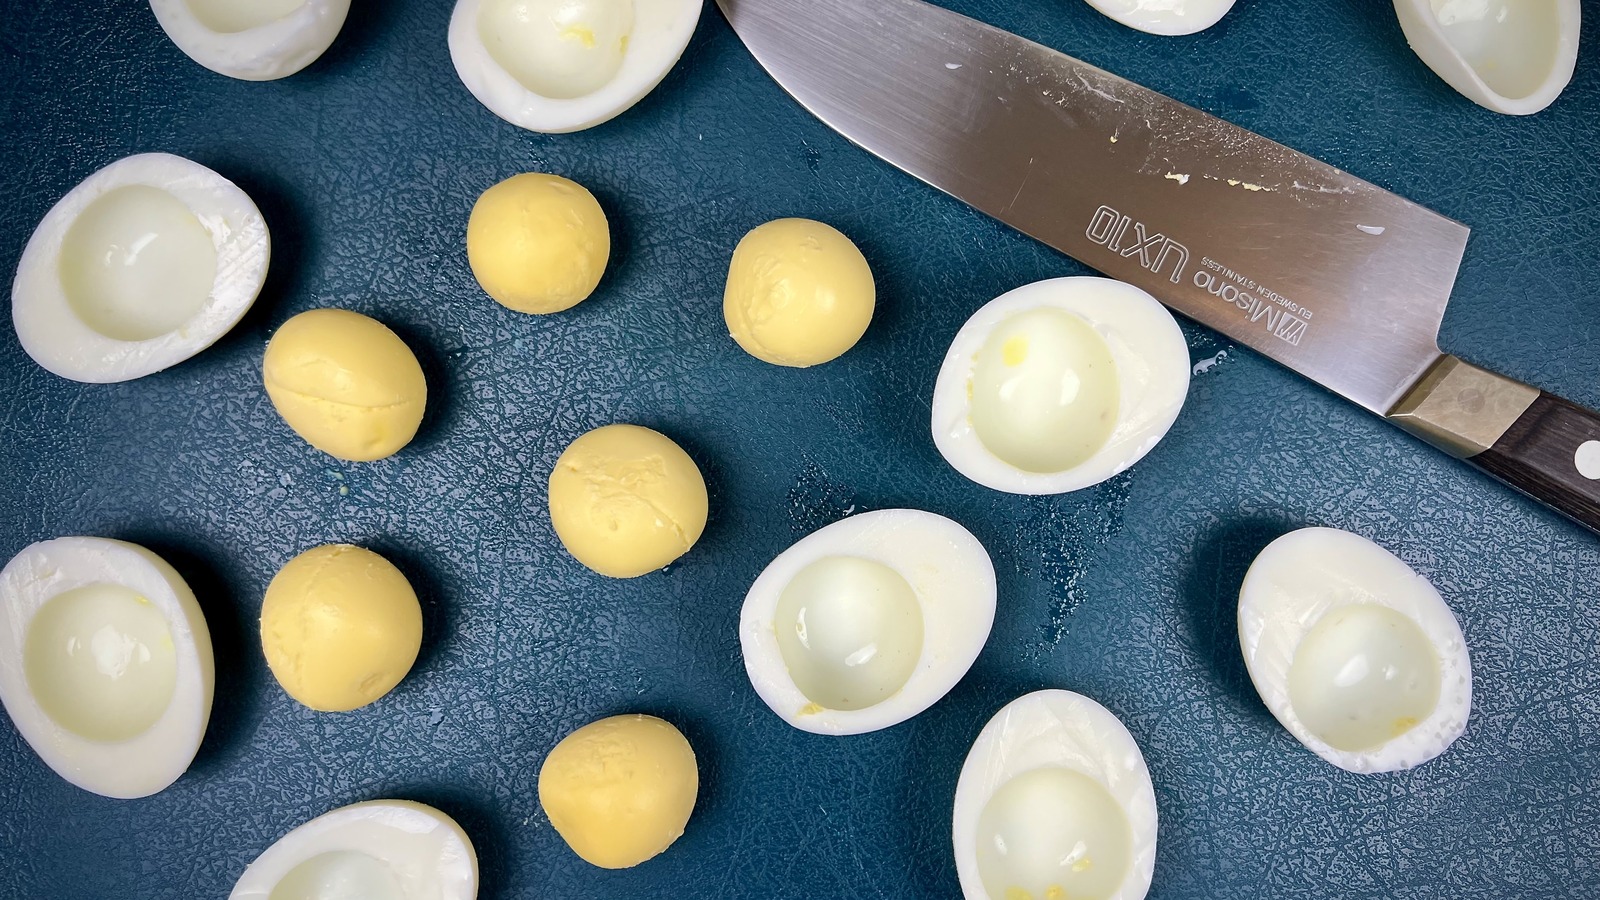  CHBC Fancy Cut Eggs Cooked Eggs Cutter Home Boiled